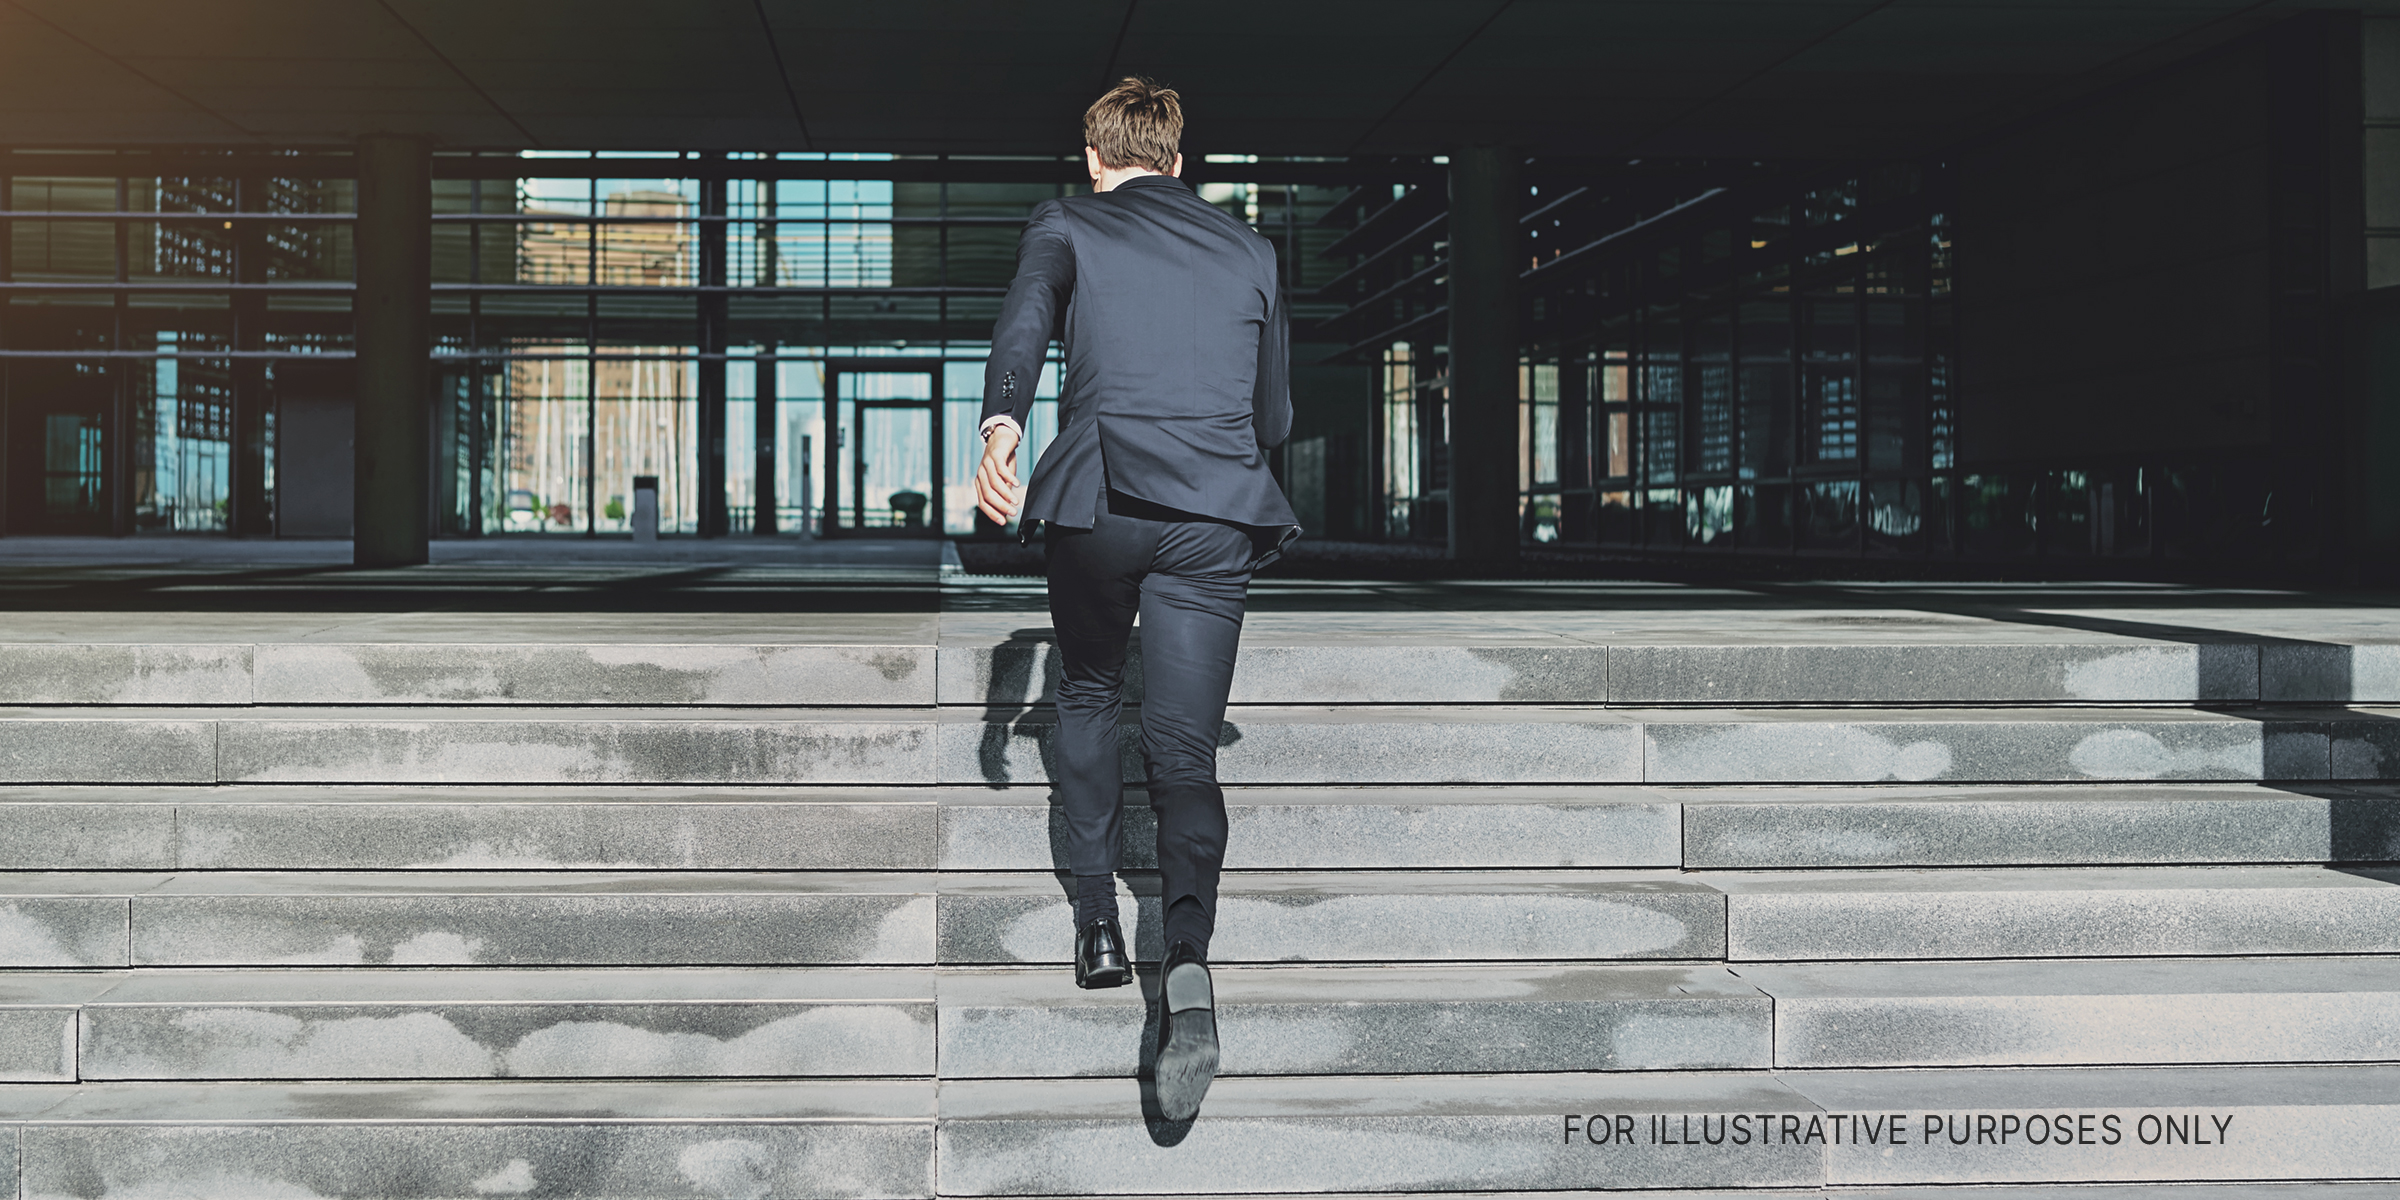 Man in suit running up steps | Source: Shutterstock